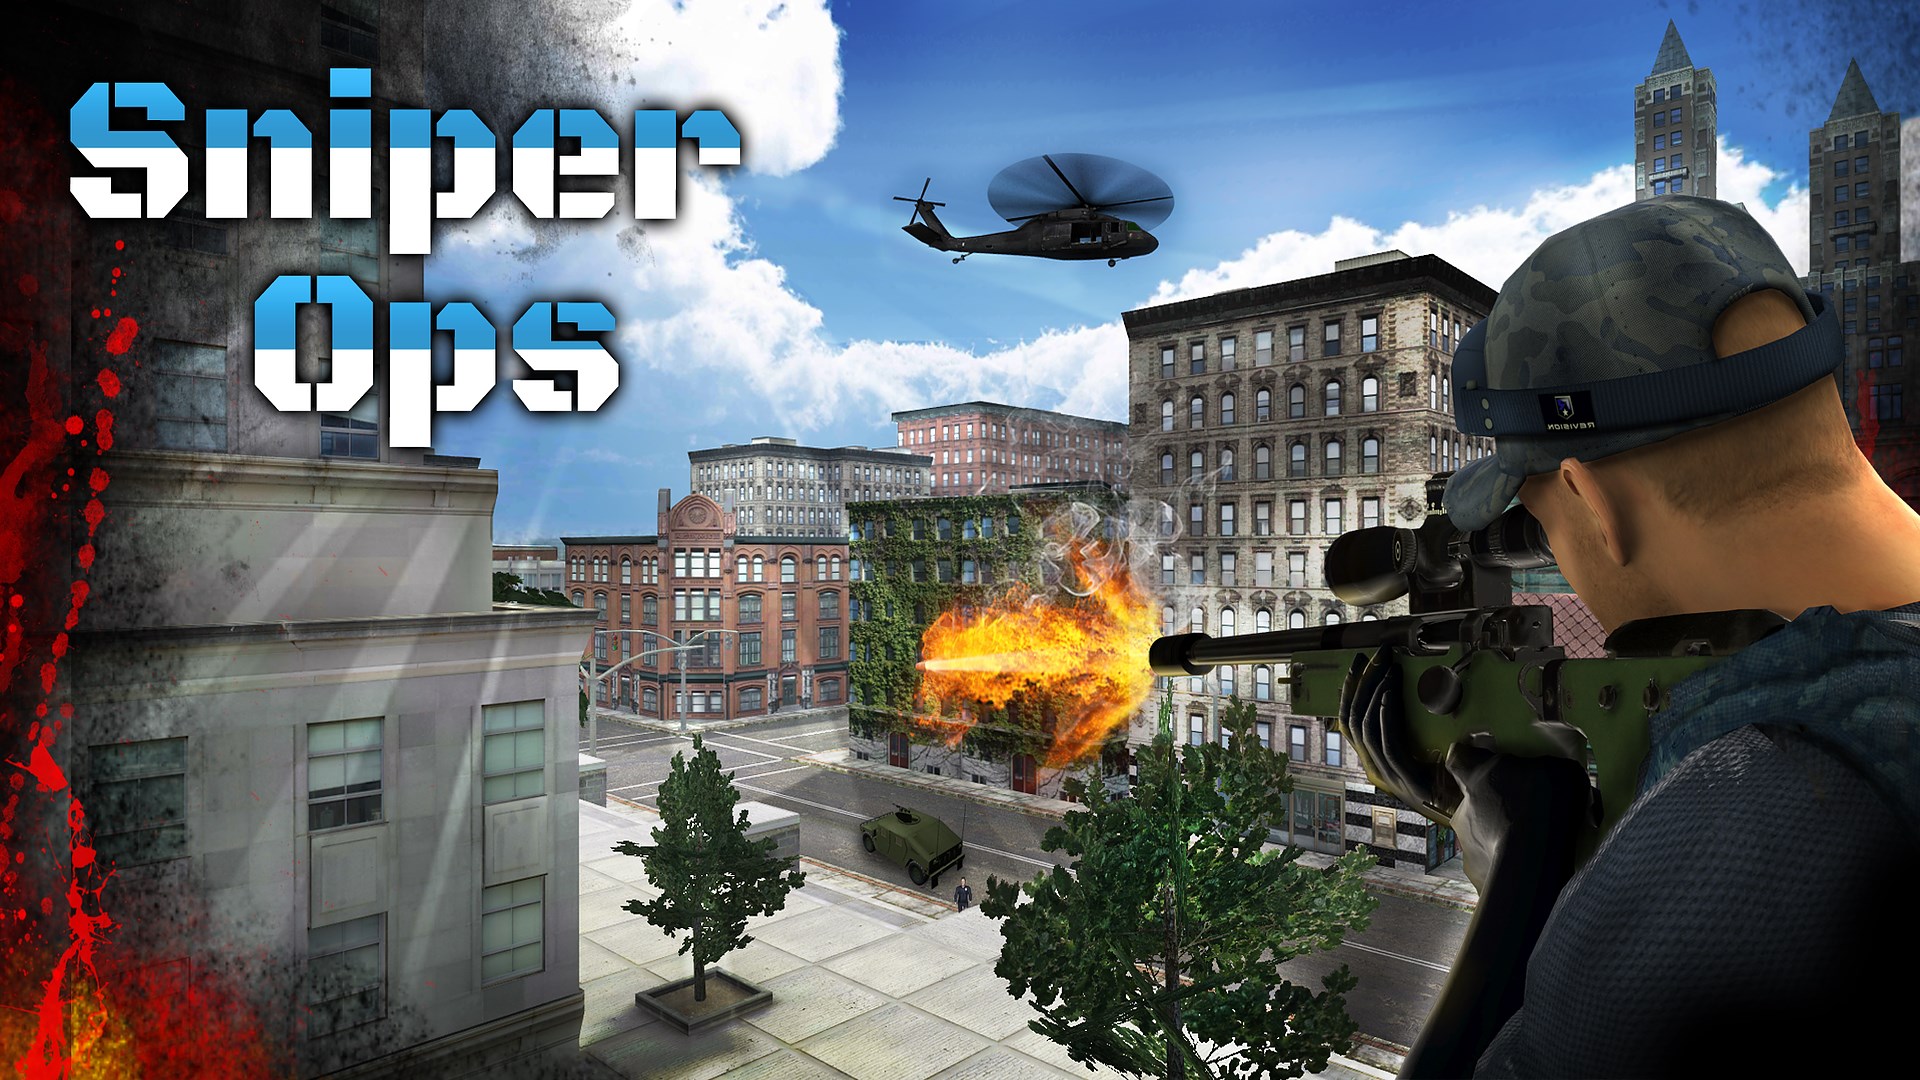 Play Free Online Shooting Games For PC